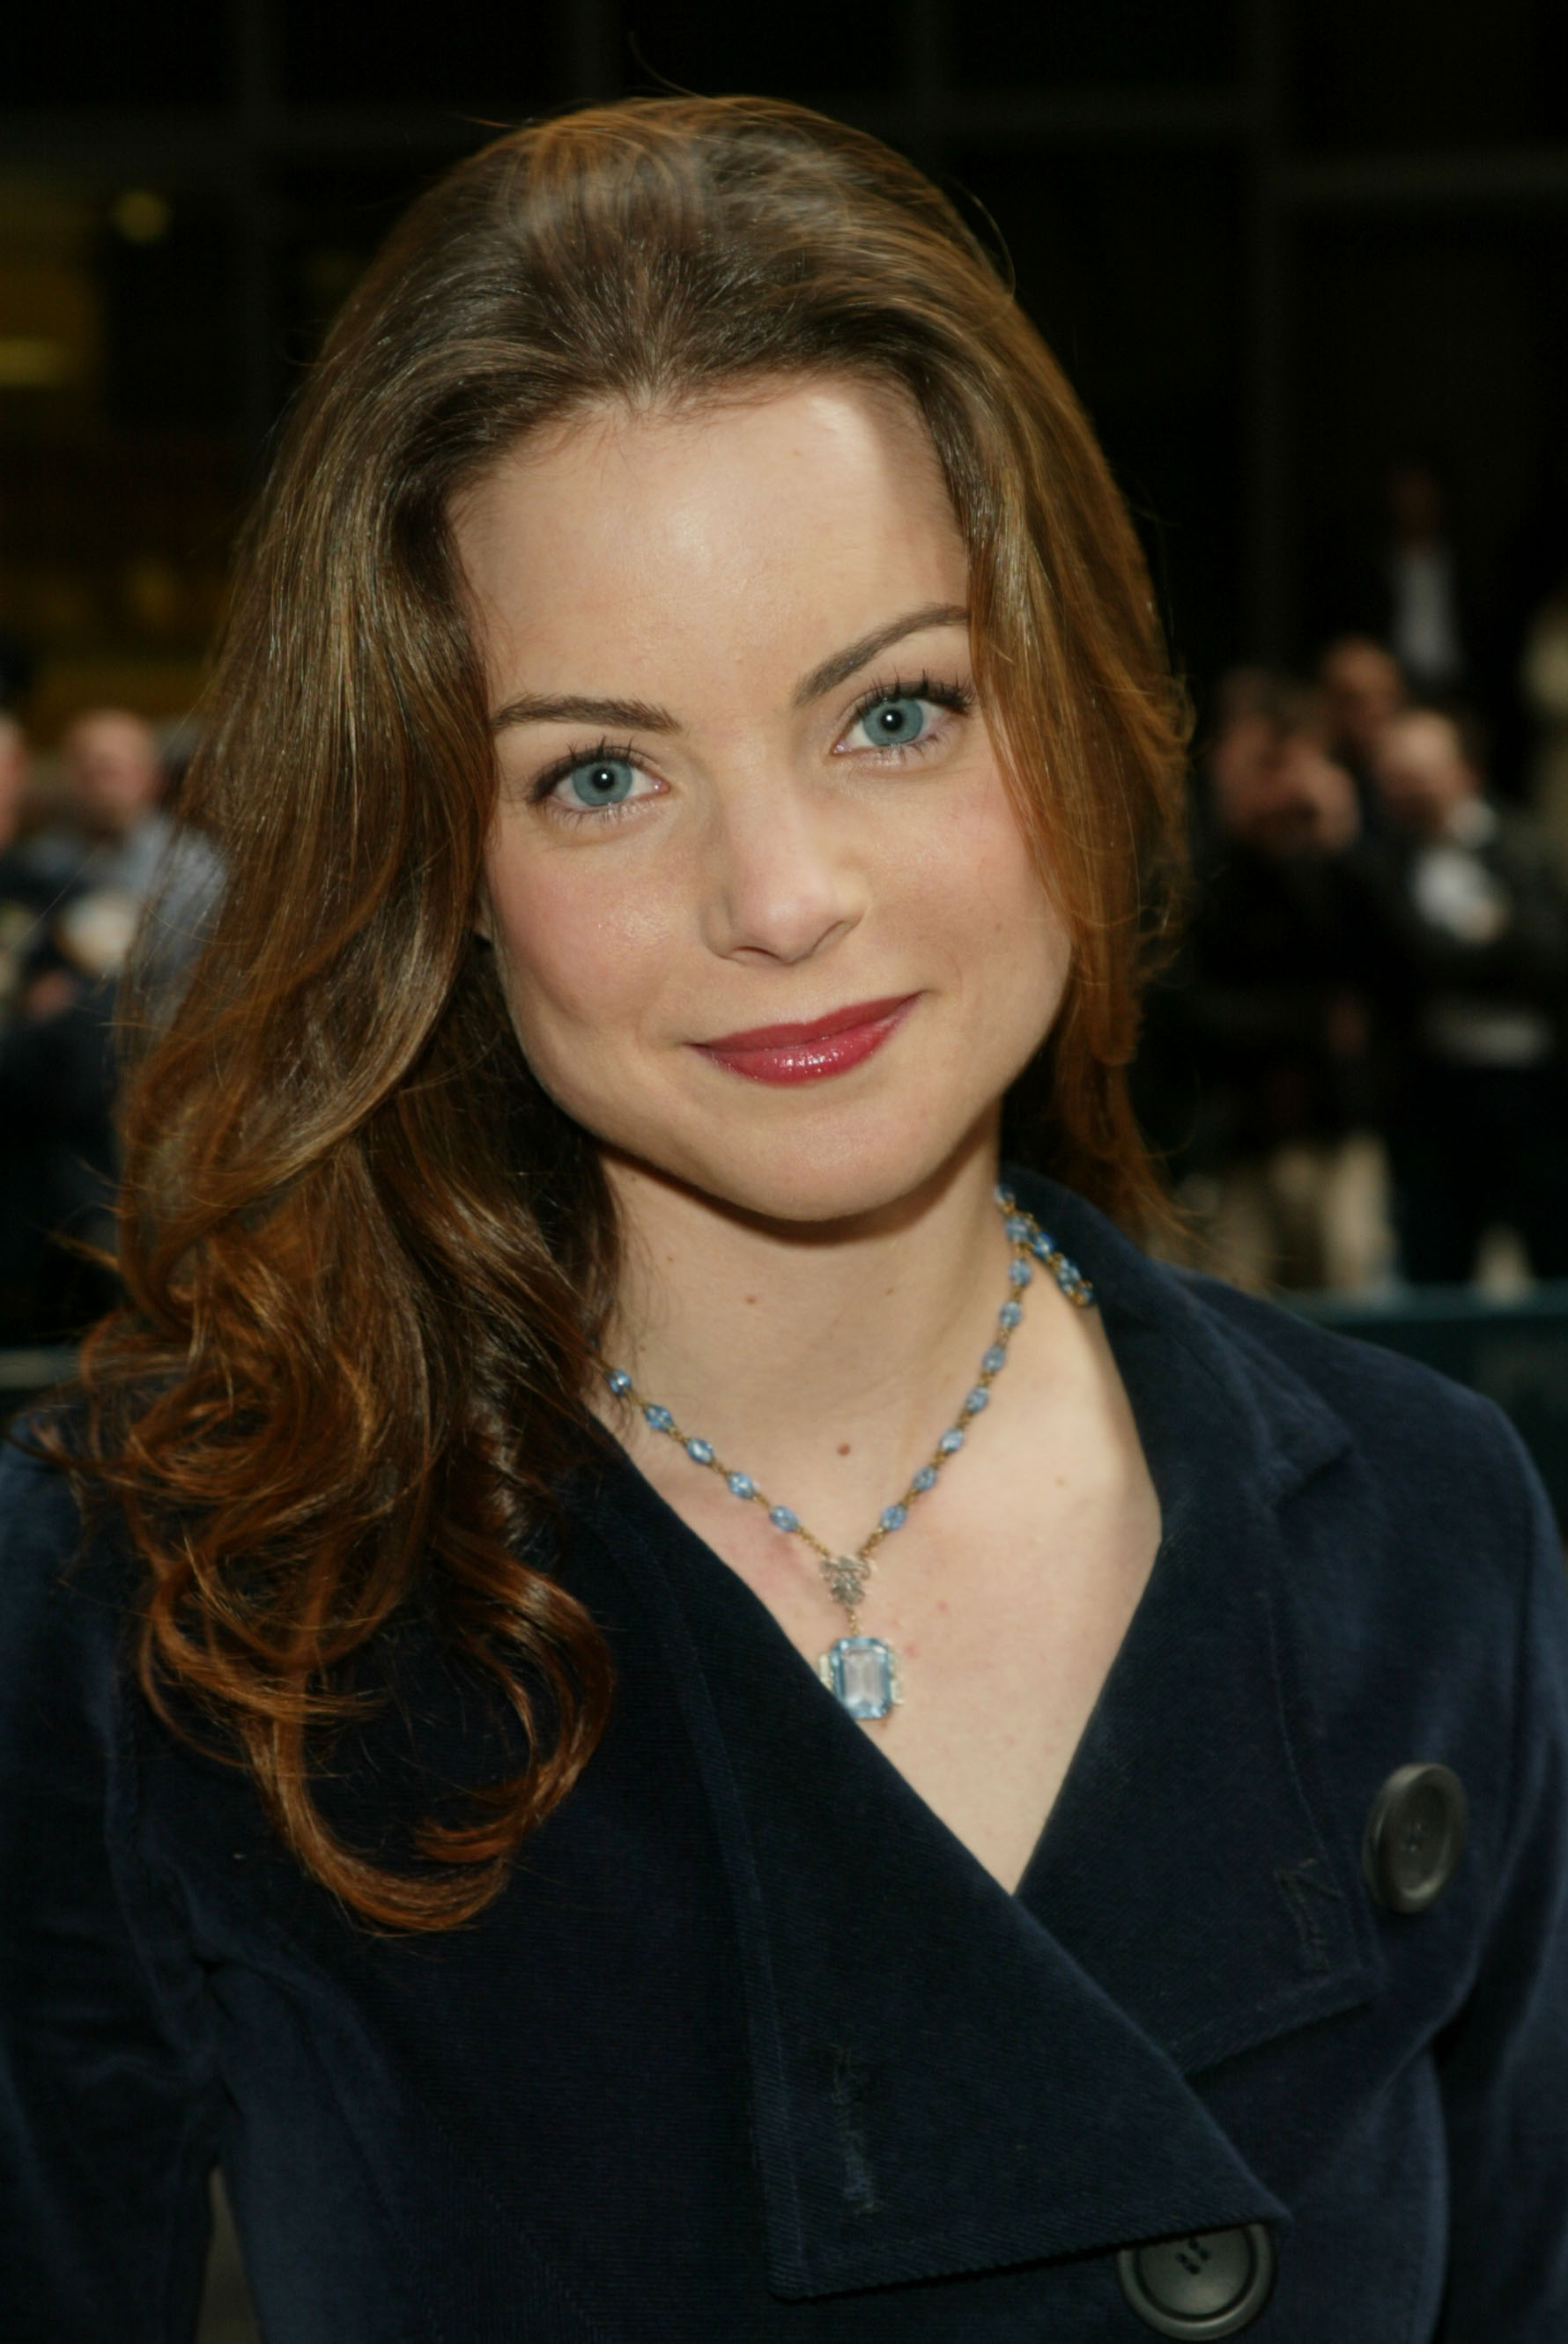 Kimberly Williams at Cipriani's 42nd Street in New York City, on May 14, 2002 | Source: Getty Images